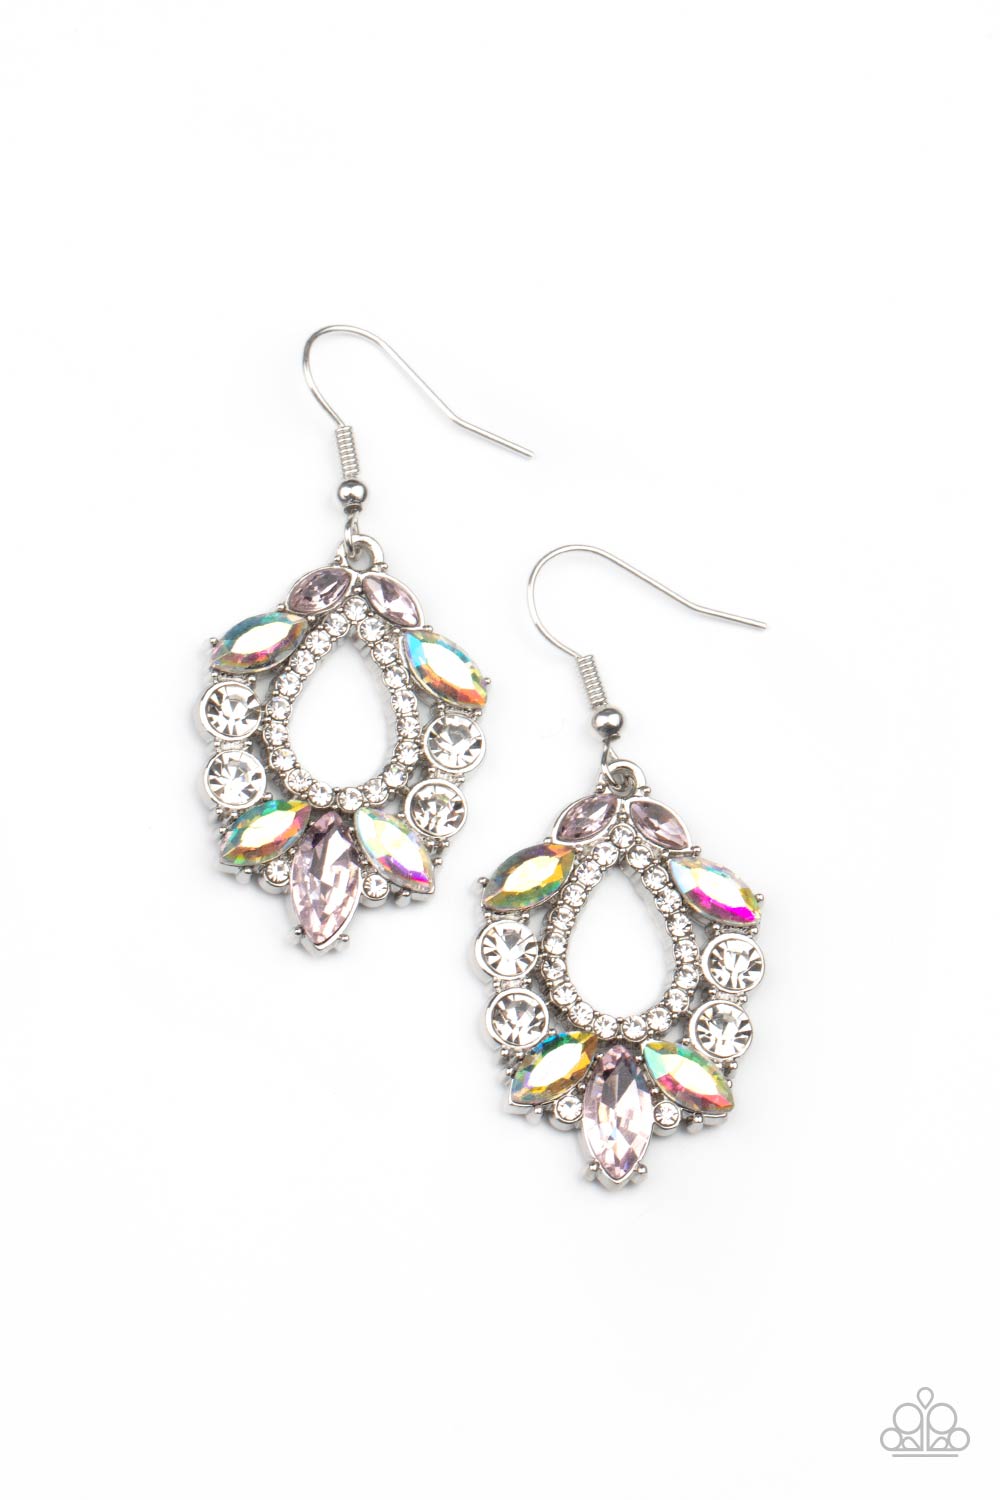 New Age Noble Multi Earring - Paparazzi Accessories  Featuring regal marquise and classic round cuts, a glittery collection of pink, white, and iridescent rhinestones coalesce into a jaw-dropping teardrop frame. Earring attaches to a standard fishhook fitting.  All Paparazzi Accessories are lead free and nickel free!  Sold as one pair of earrings.